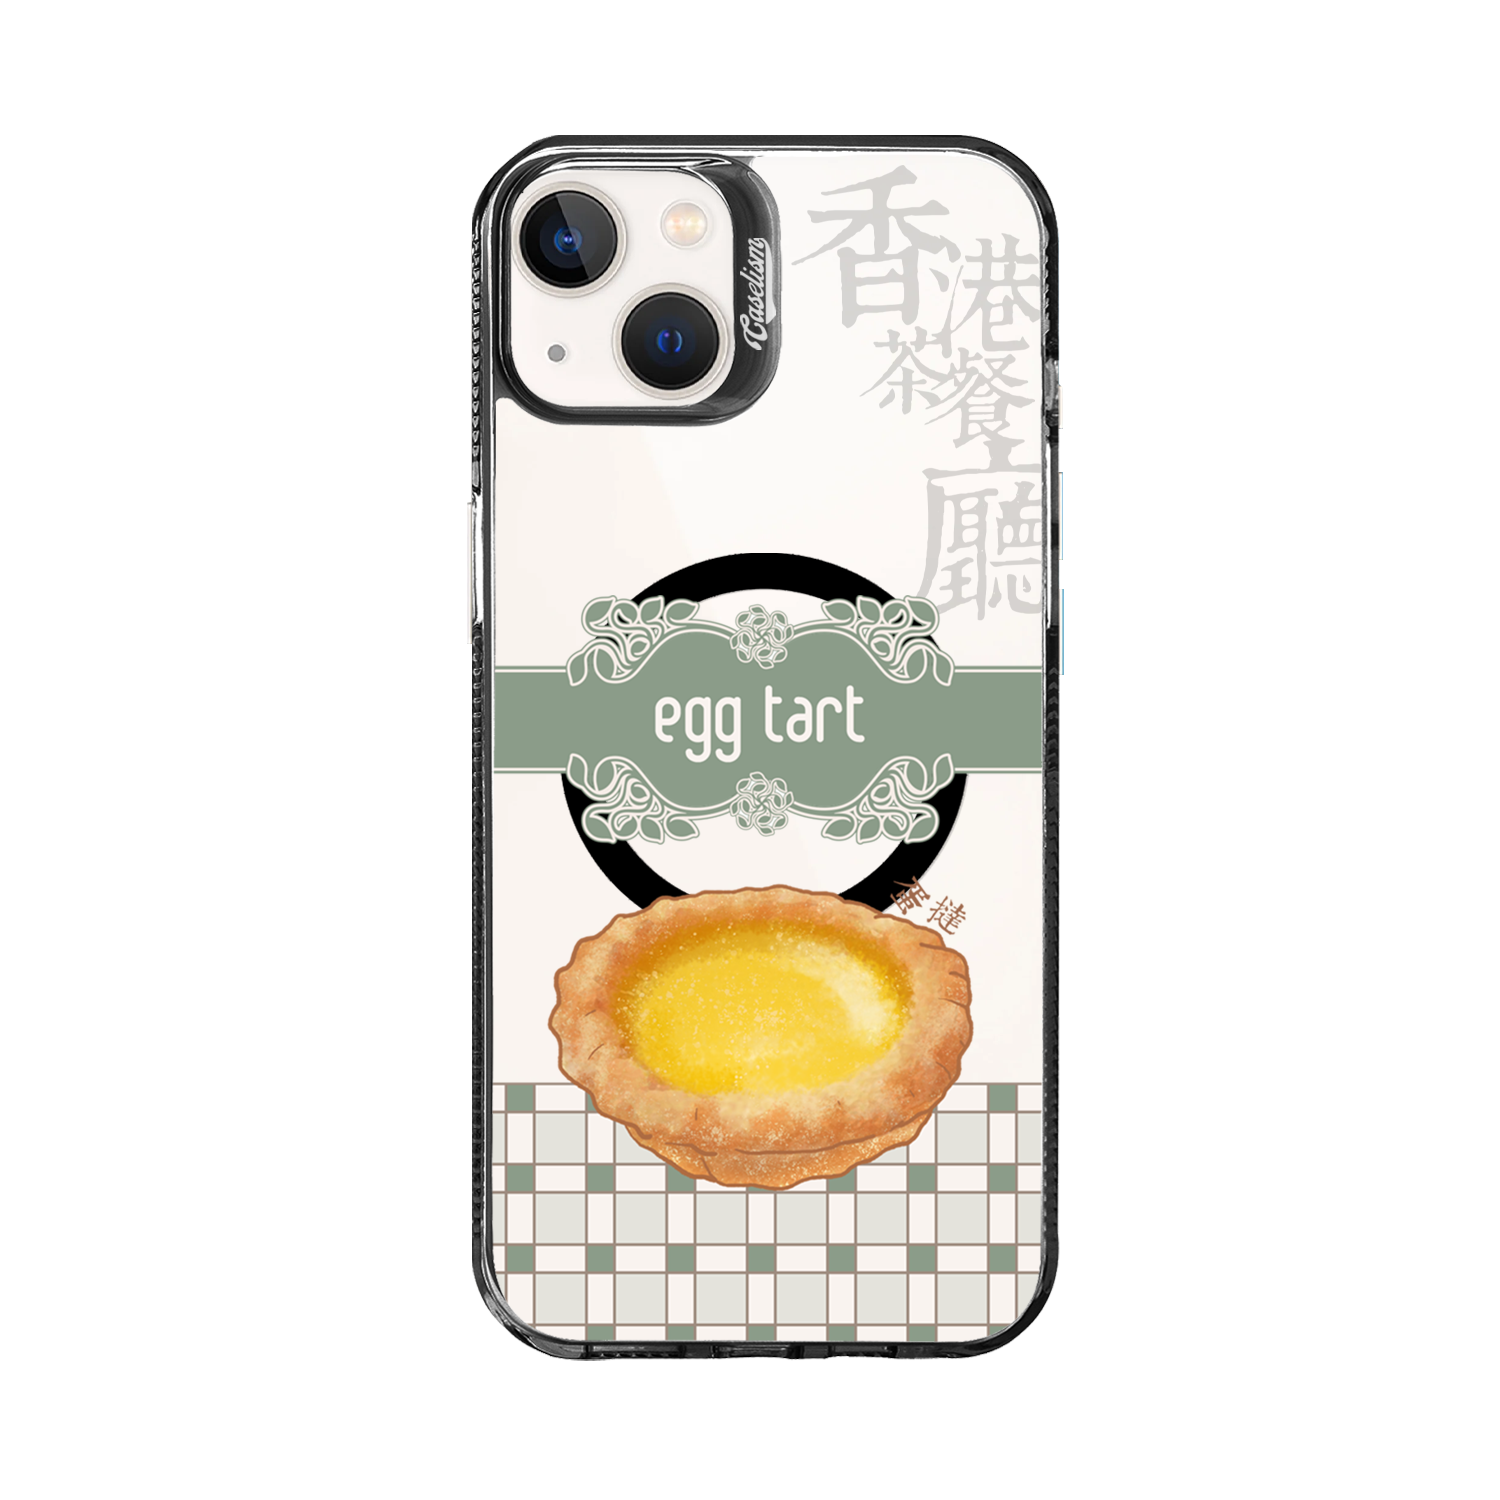 CAFE005 - ColorLite Case for iPhone